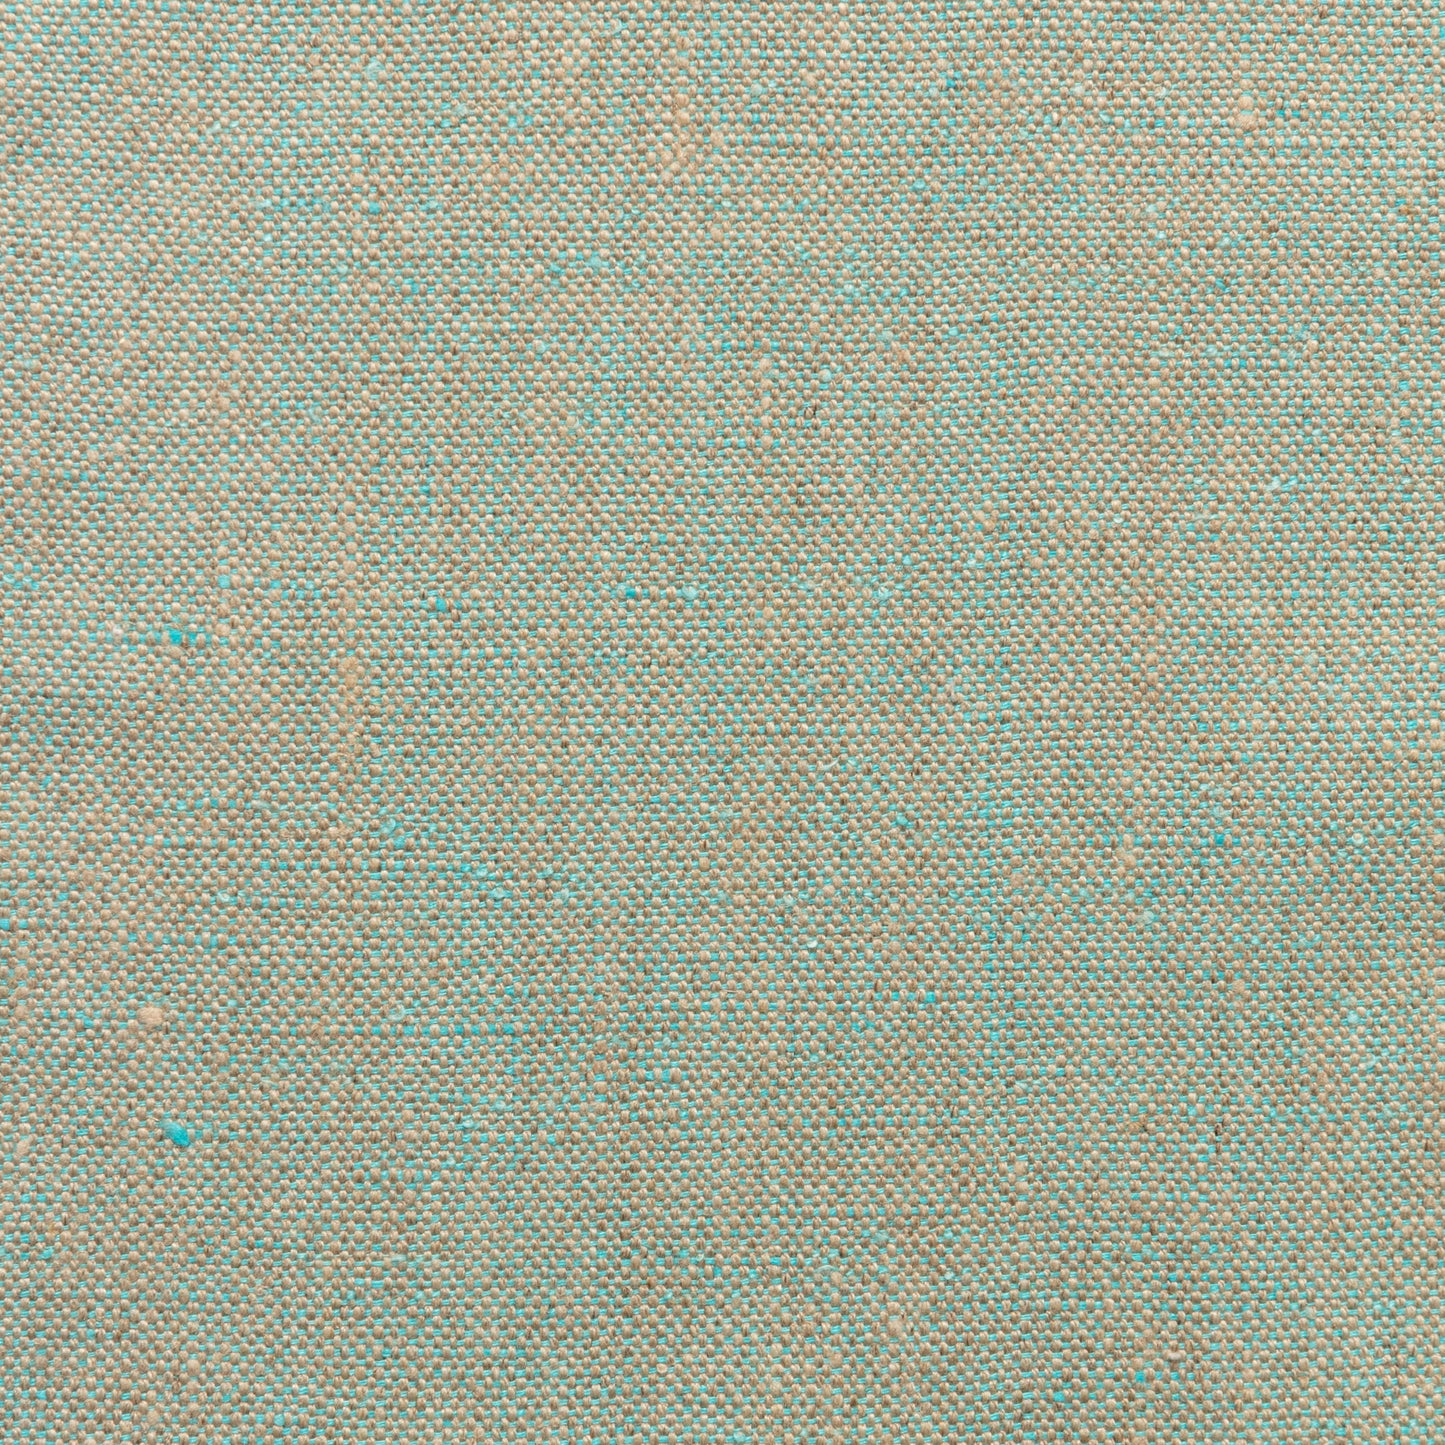 #191 TURQUOISE AND GREY LINEN